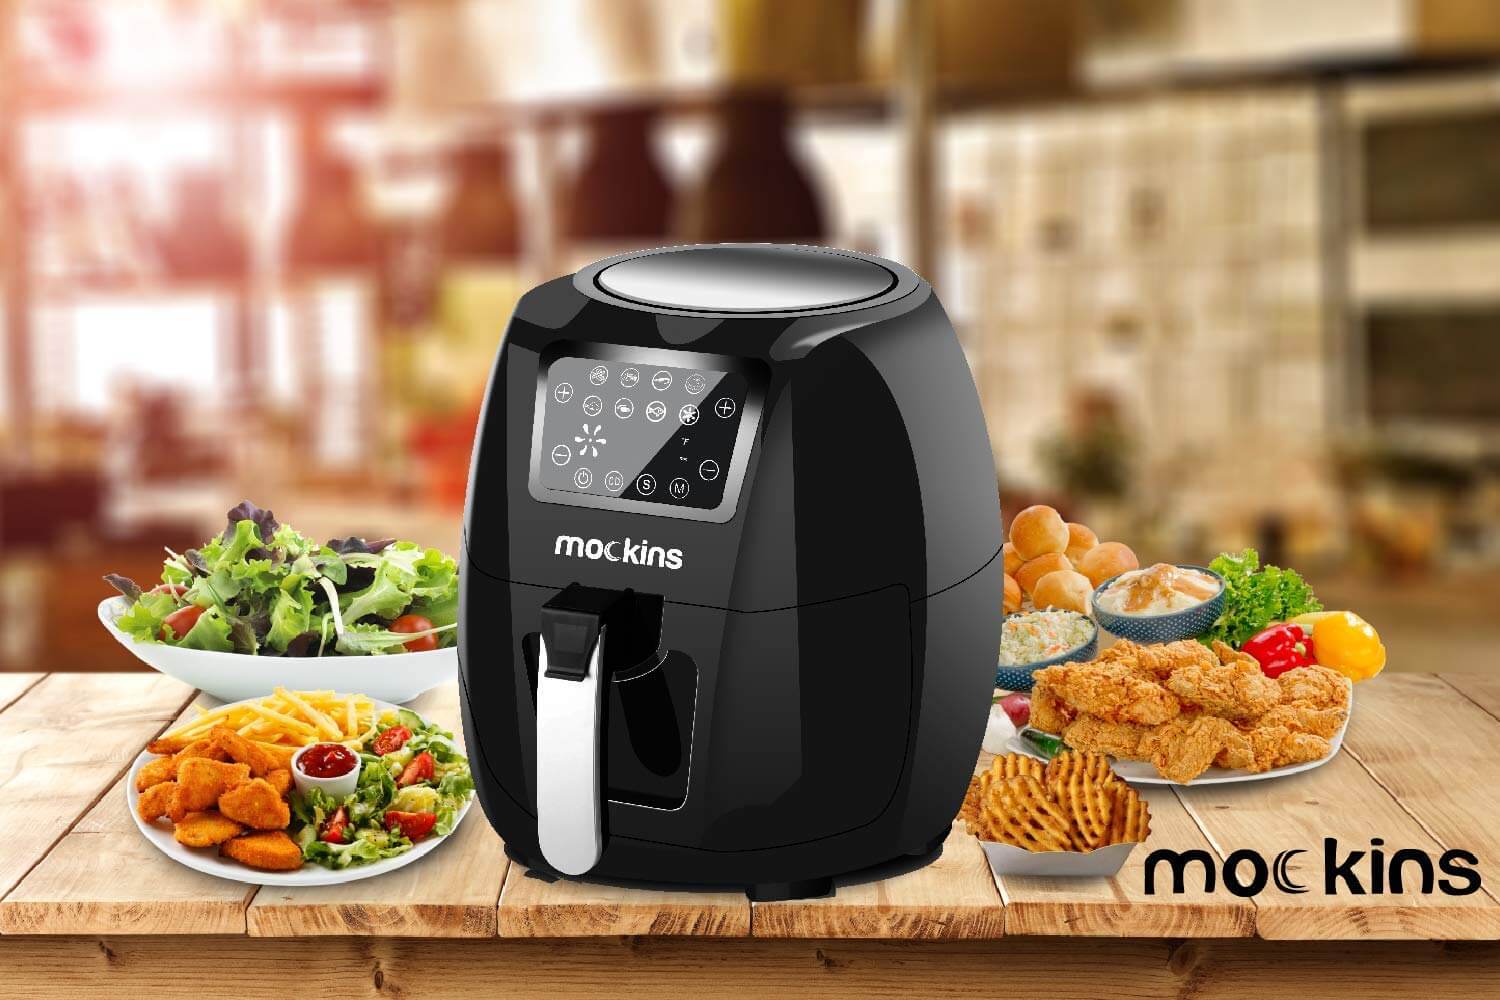 Tinychefs Multifunctional Airfryer – Oil-Free Cooking Appliance